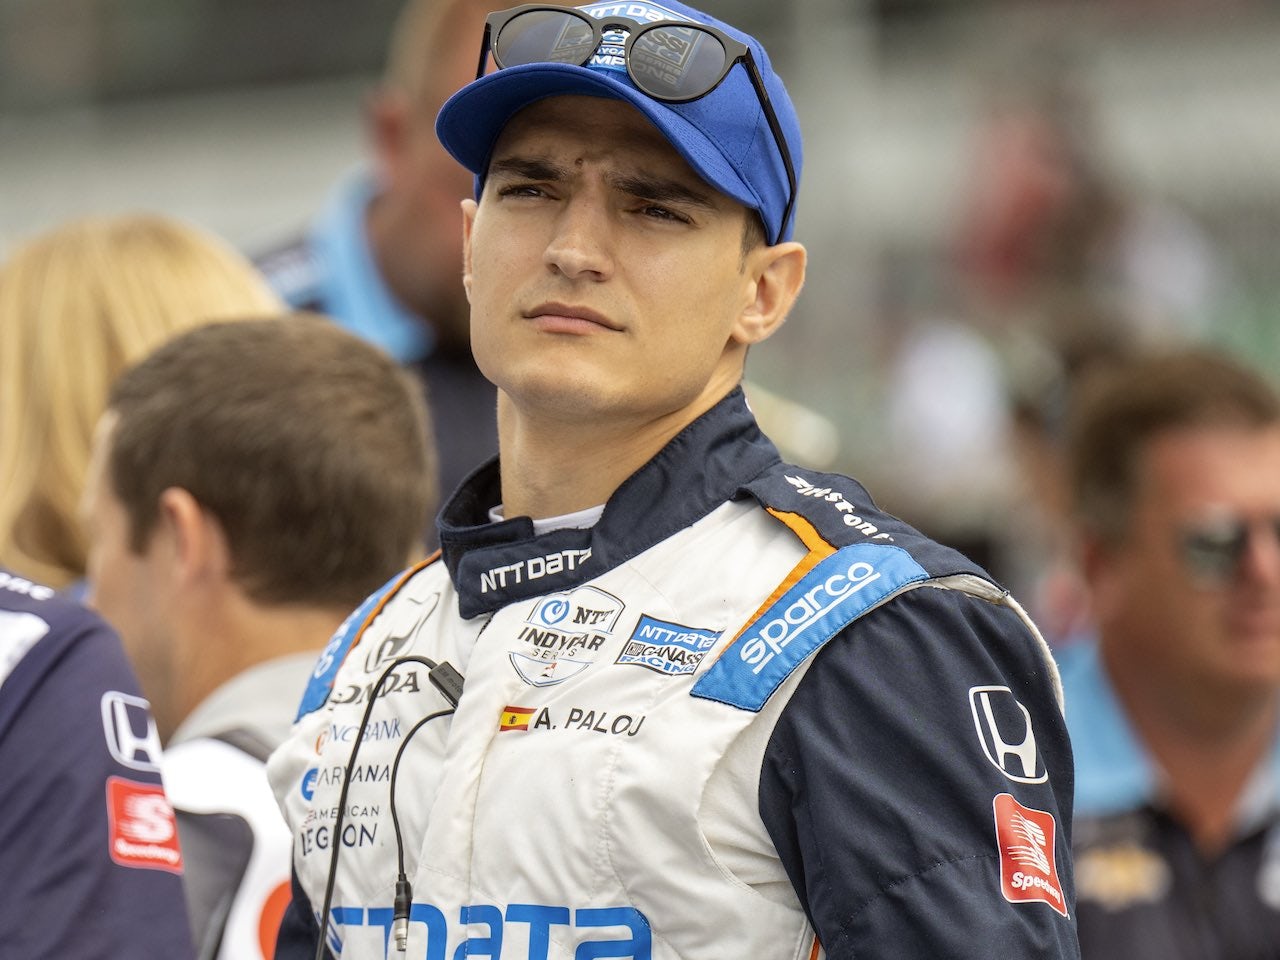 Andretti backs Palou to succeed in F1